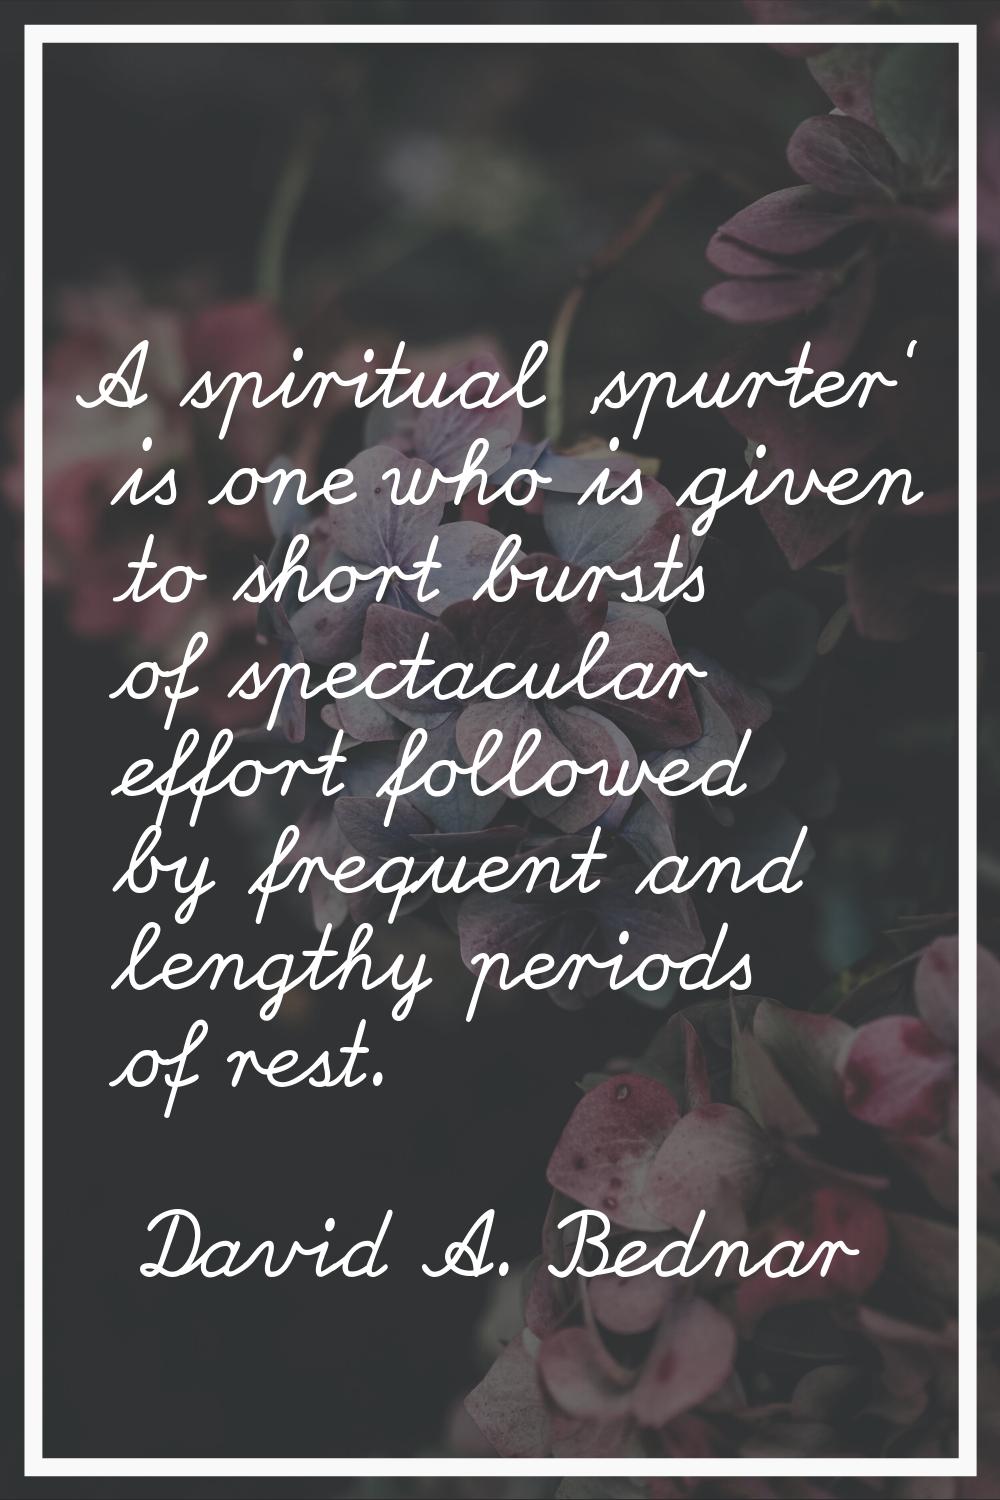 A spiritual 'spurter' is one who is given to short bursts of spectacular effort followed by frequen